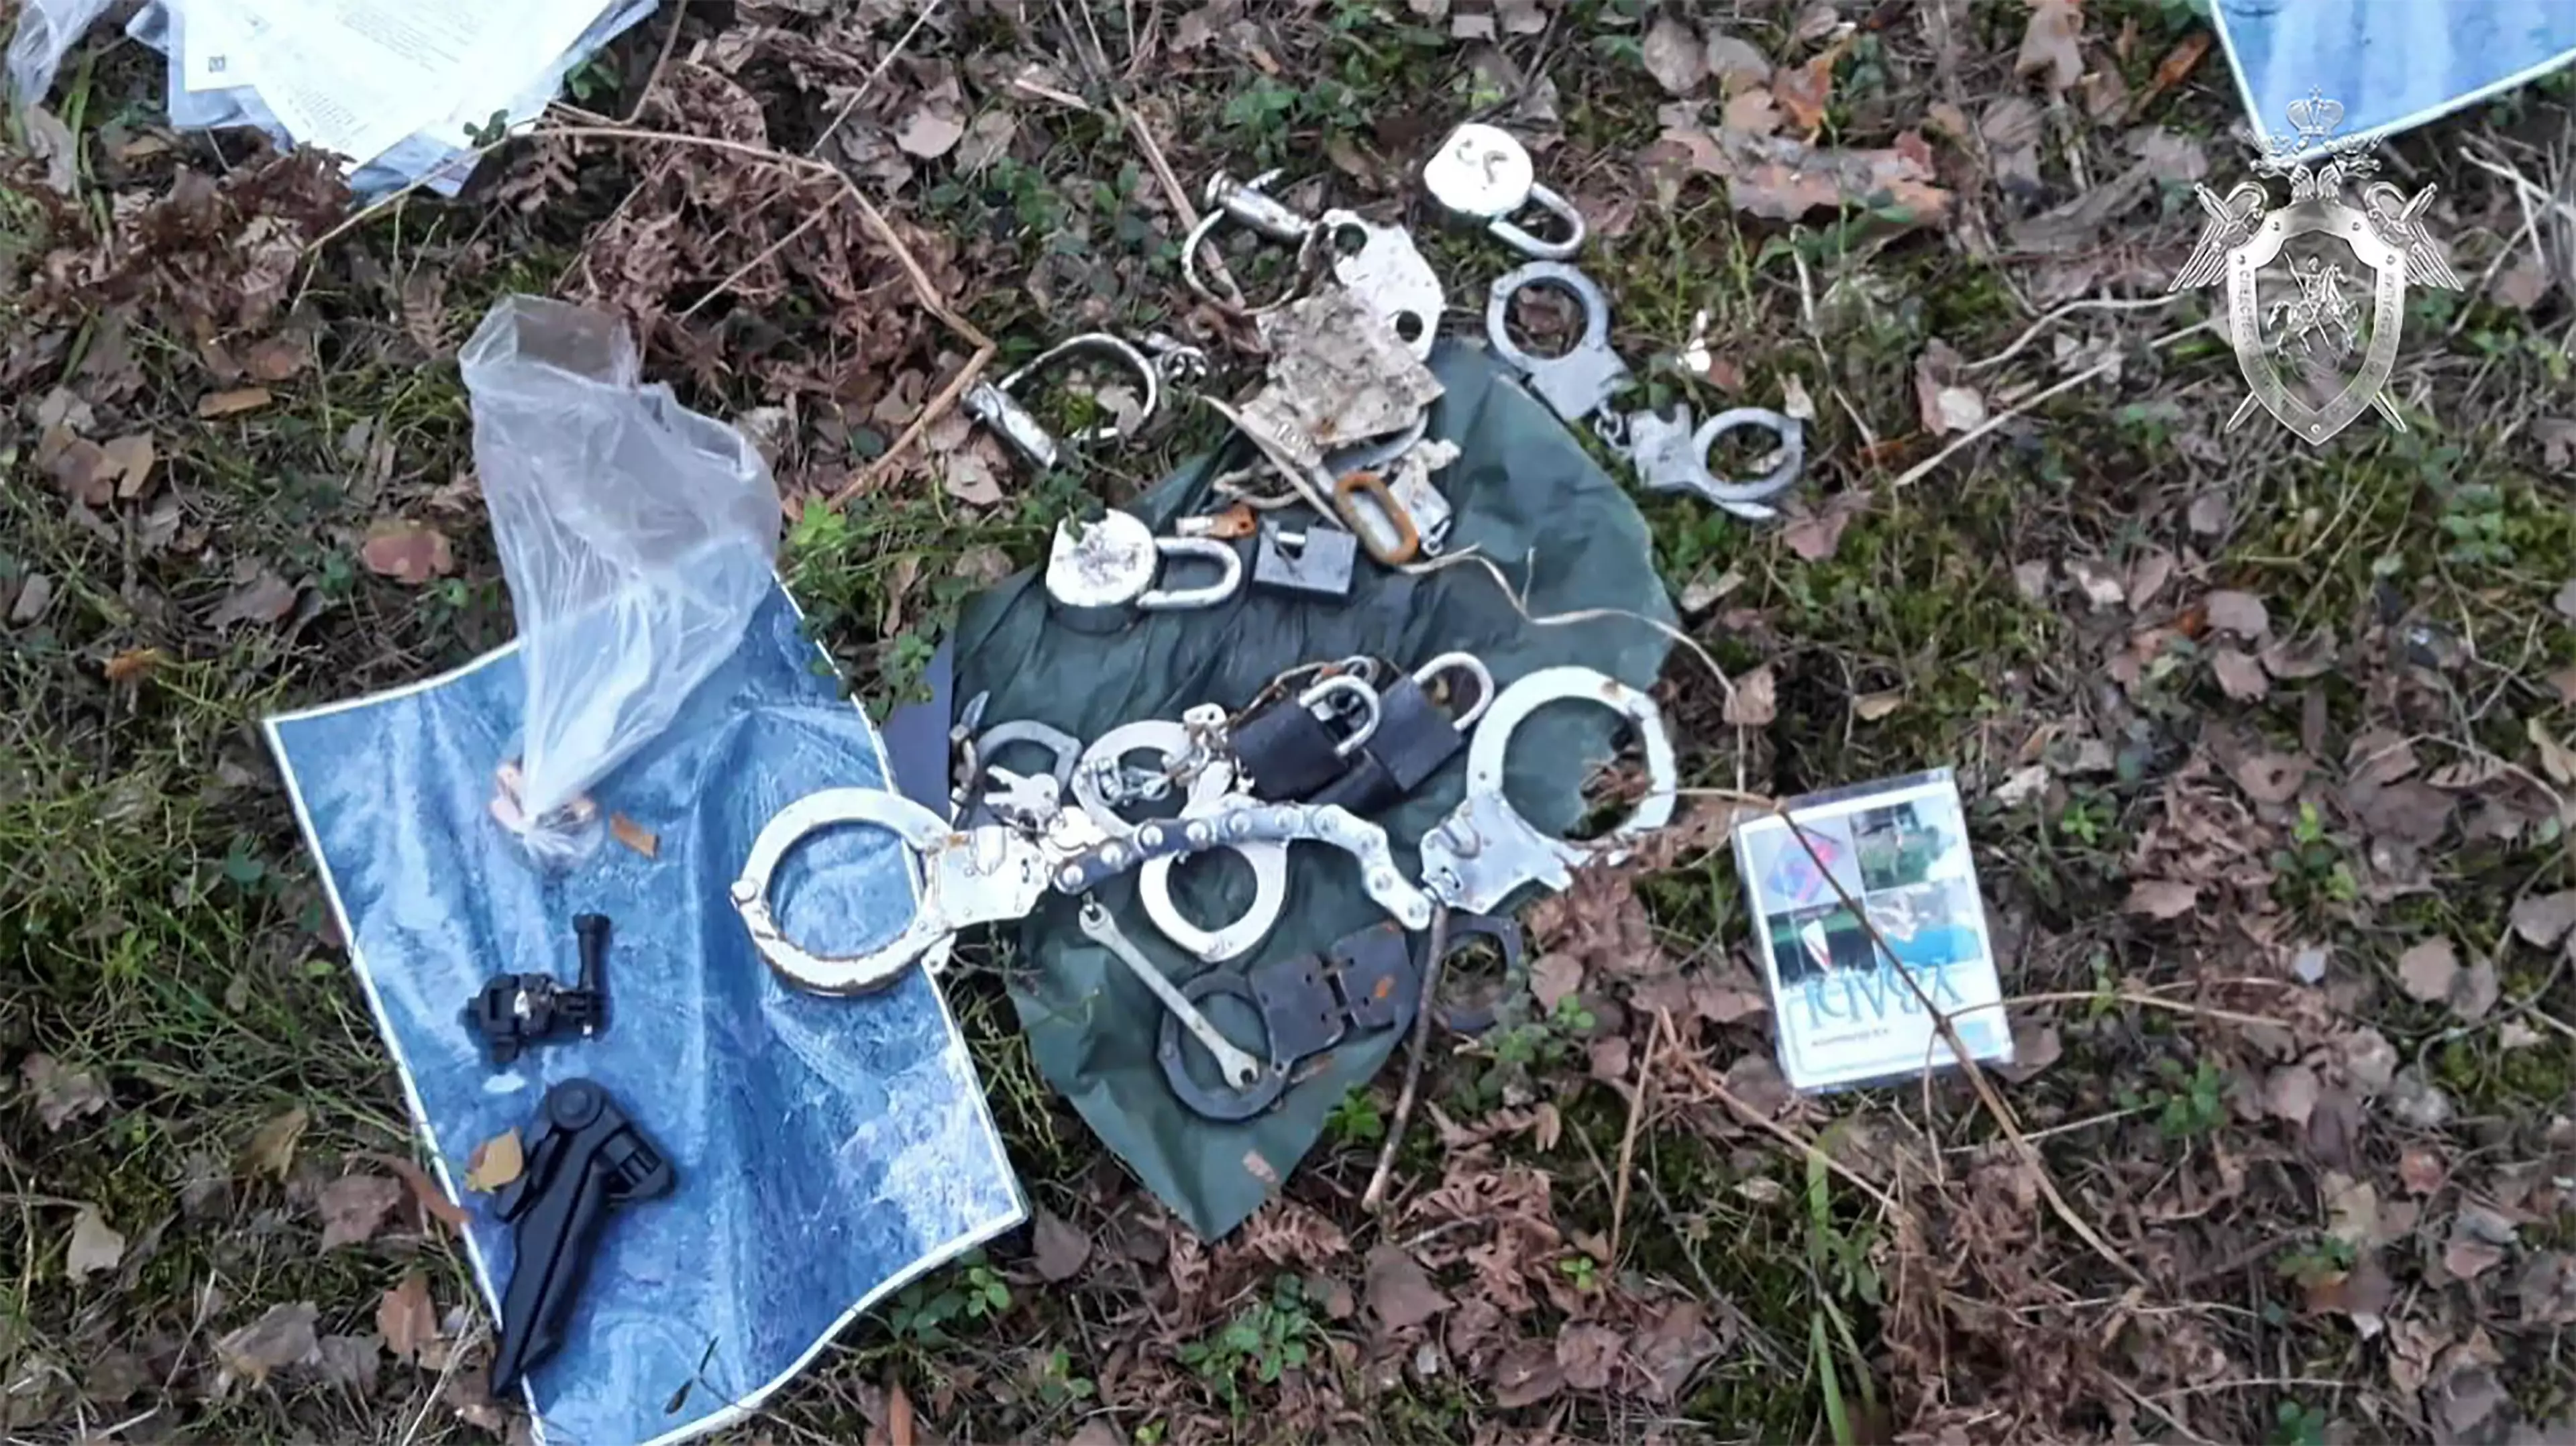 Police found a number of padlocks and chains near the body.